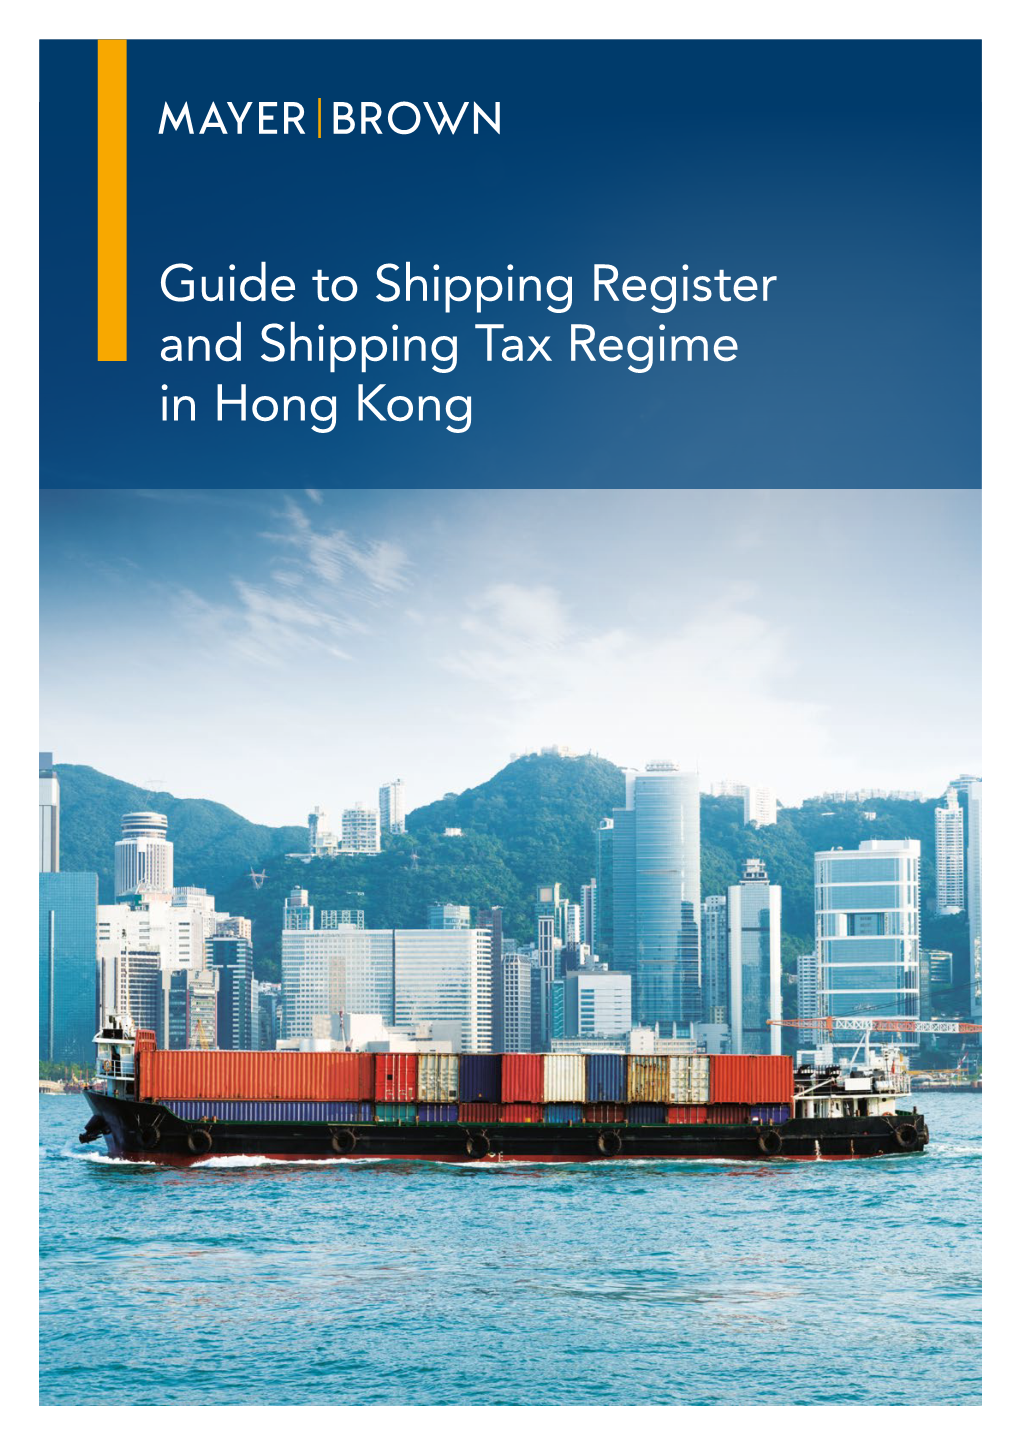 Guide to Shipping Register and Shipping Tax Regime in Hong Kong Contents